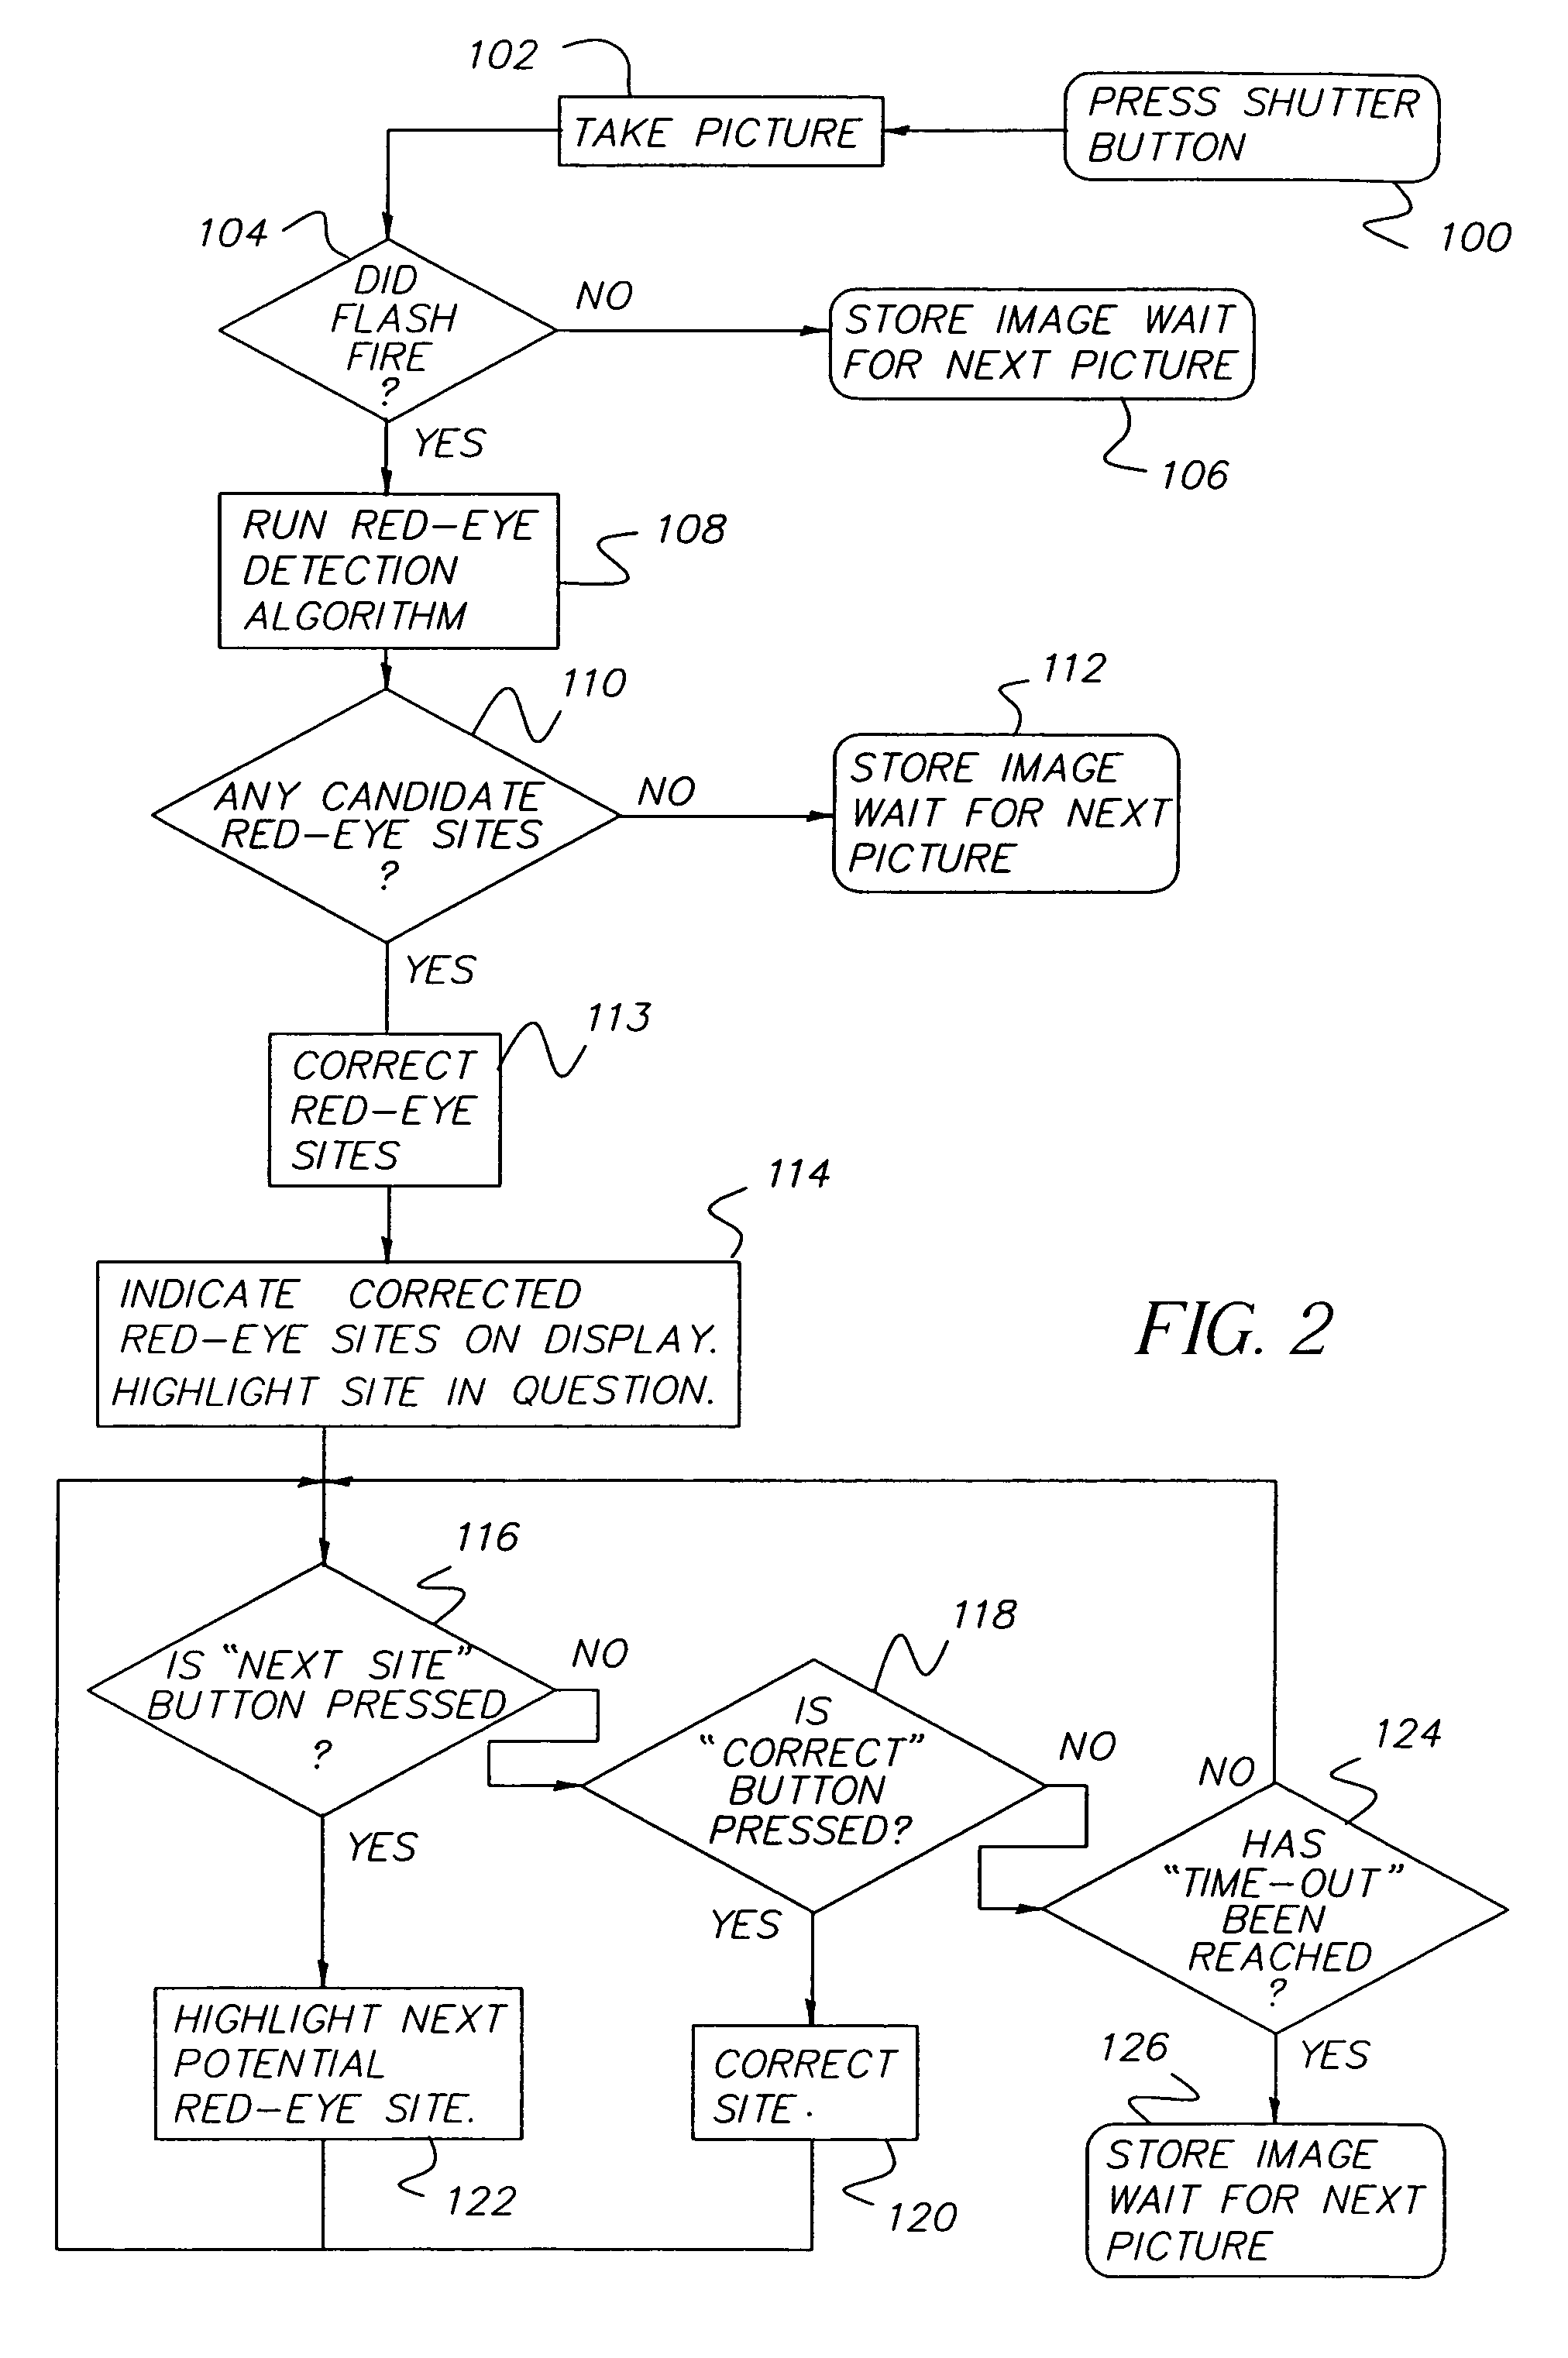 Apparatus and method for processing digital images having eye color defects